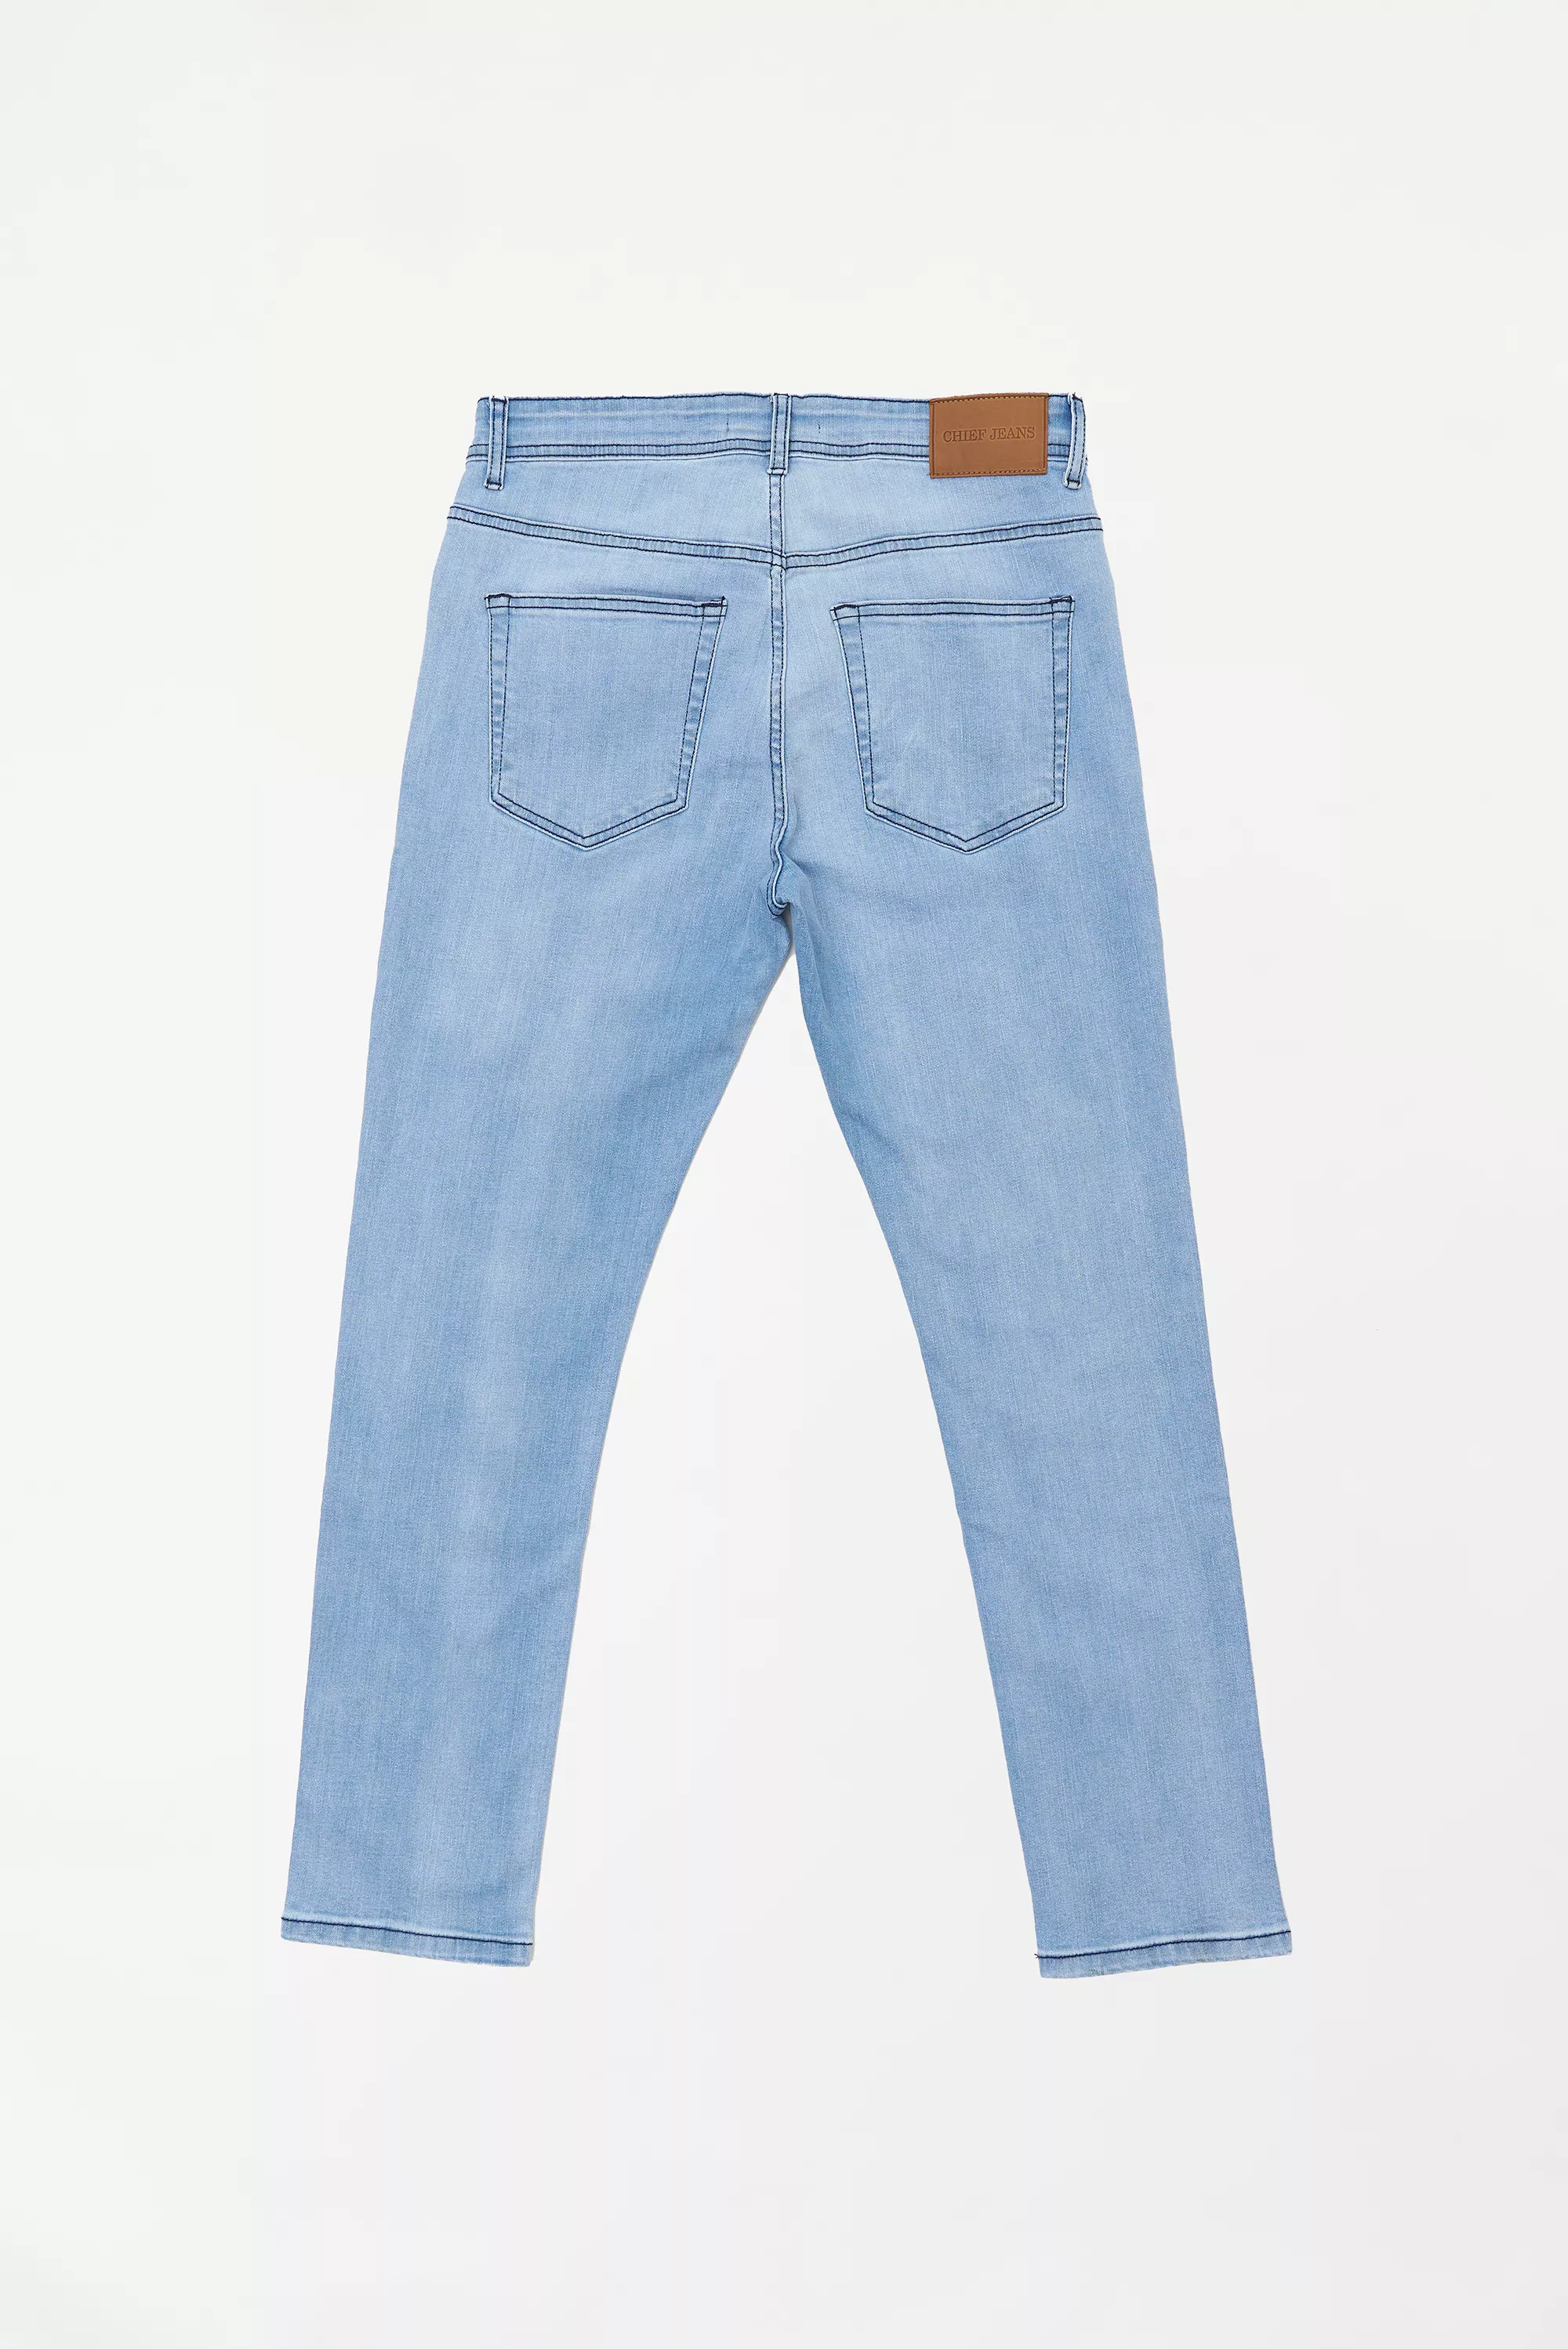 Men's Faded Tapered Fit Sky Blue Jeans